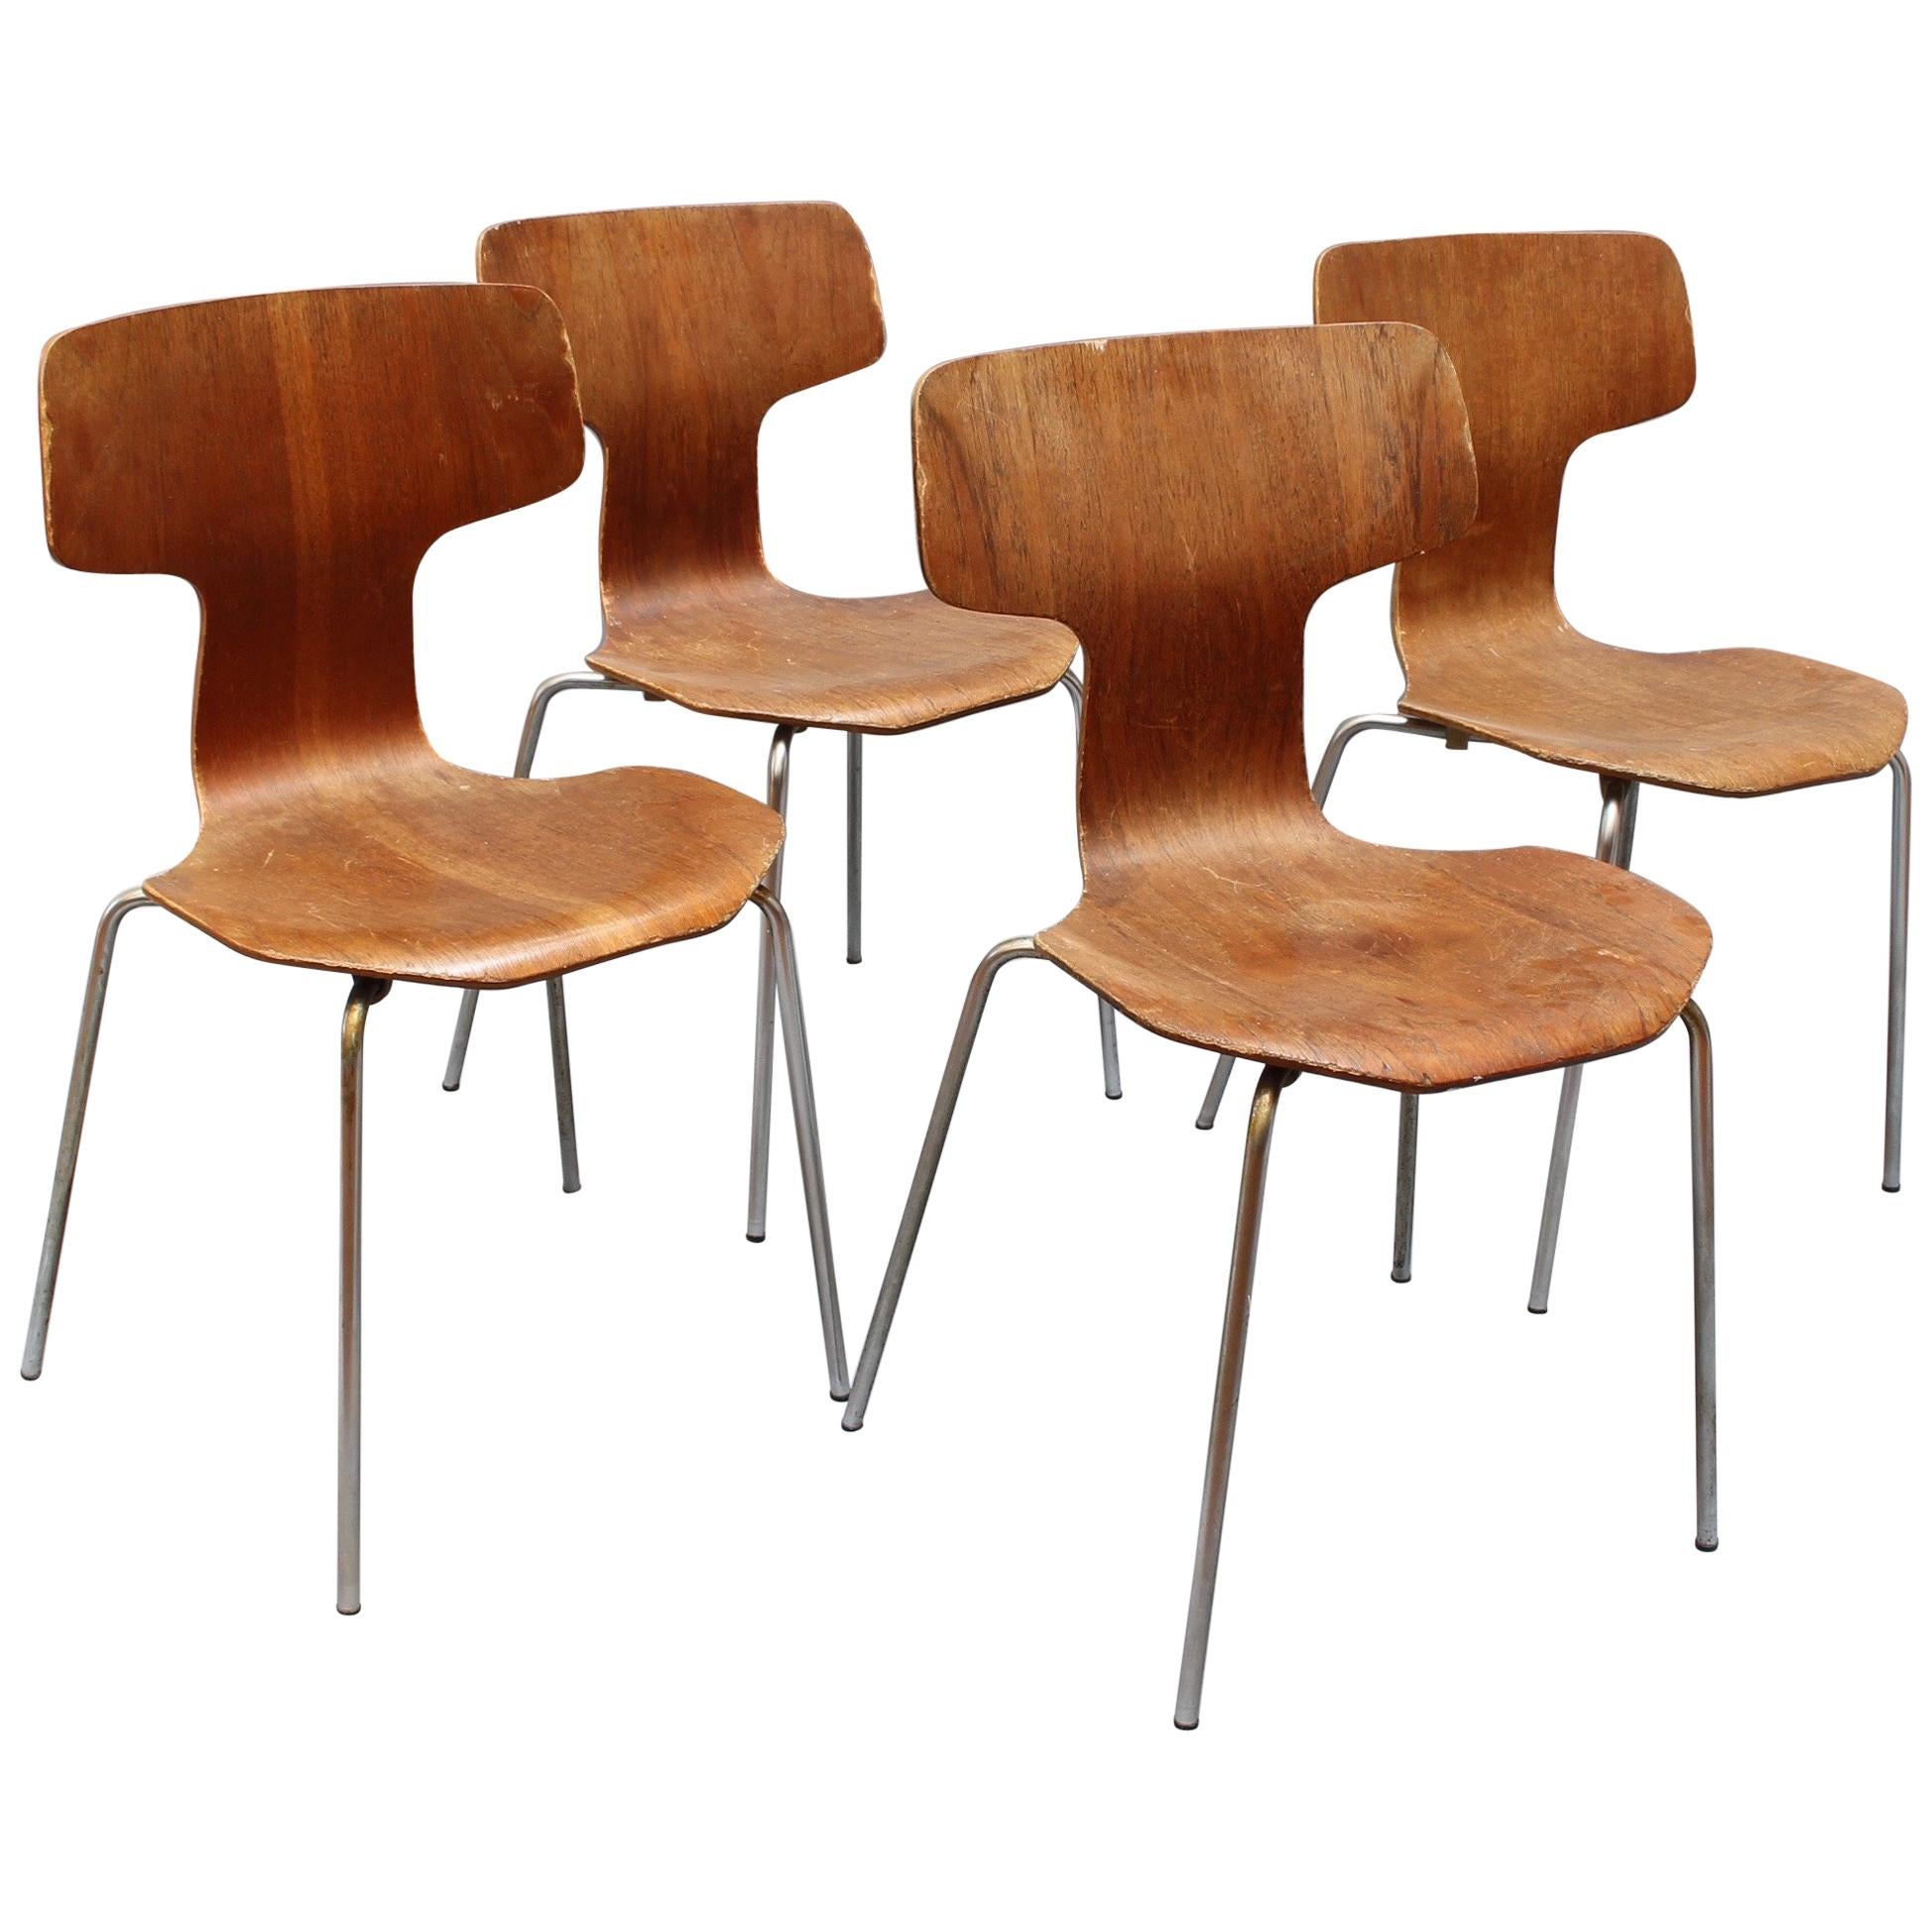 Set of Four Type 3103 Chairs by Arne Jacobsen for Fritz Hansen, 1969